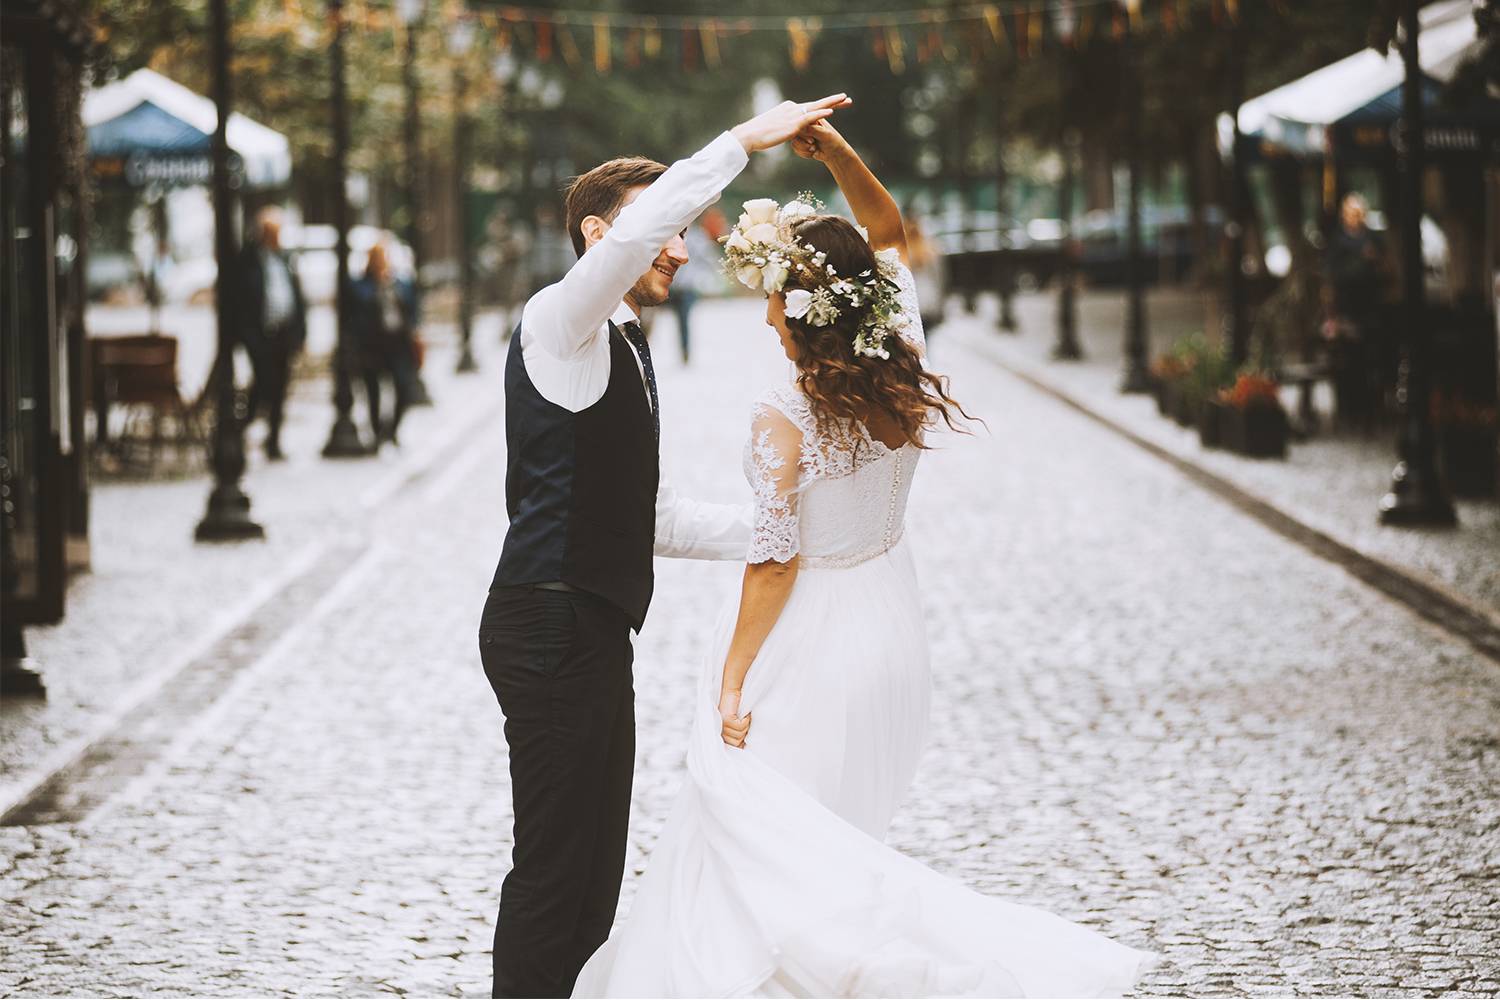 500+ Romantic Love Songs for Your Wedding Day